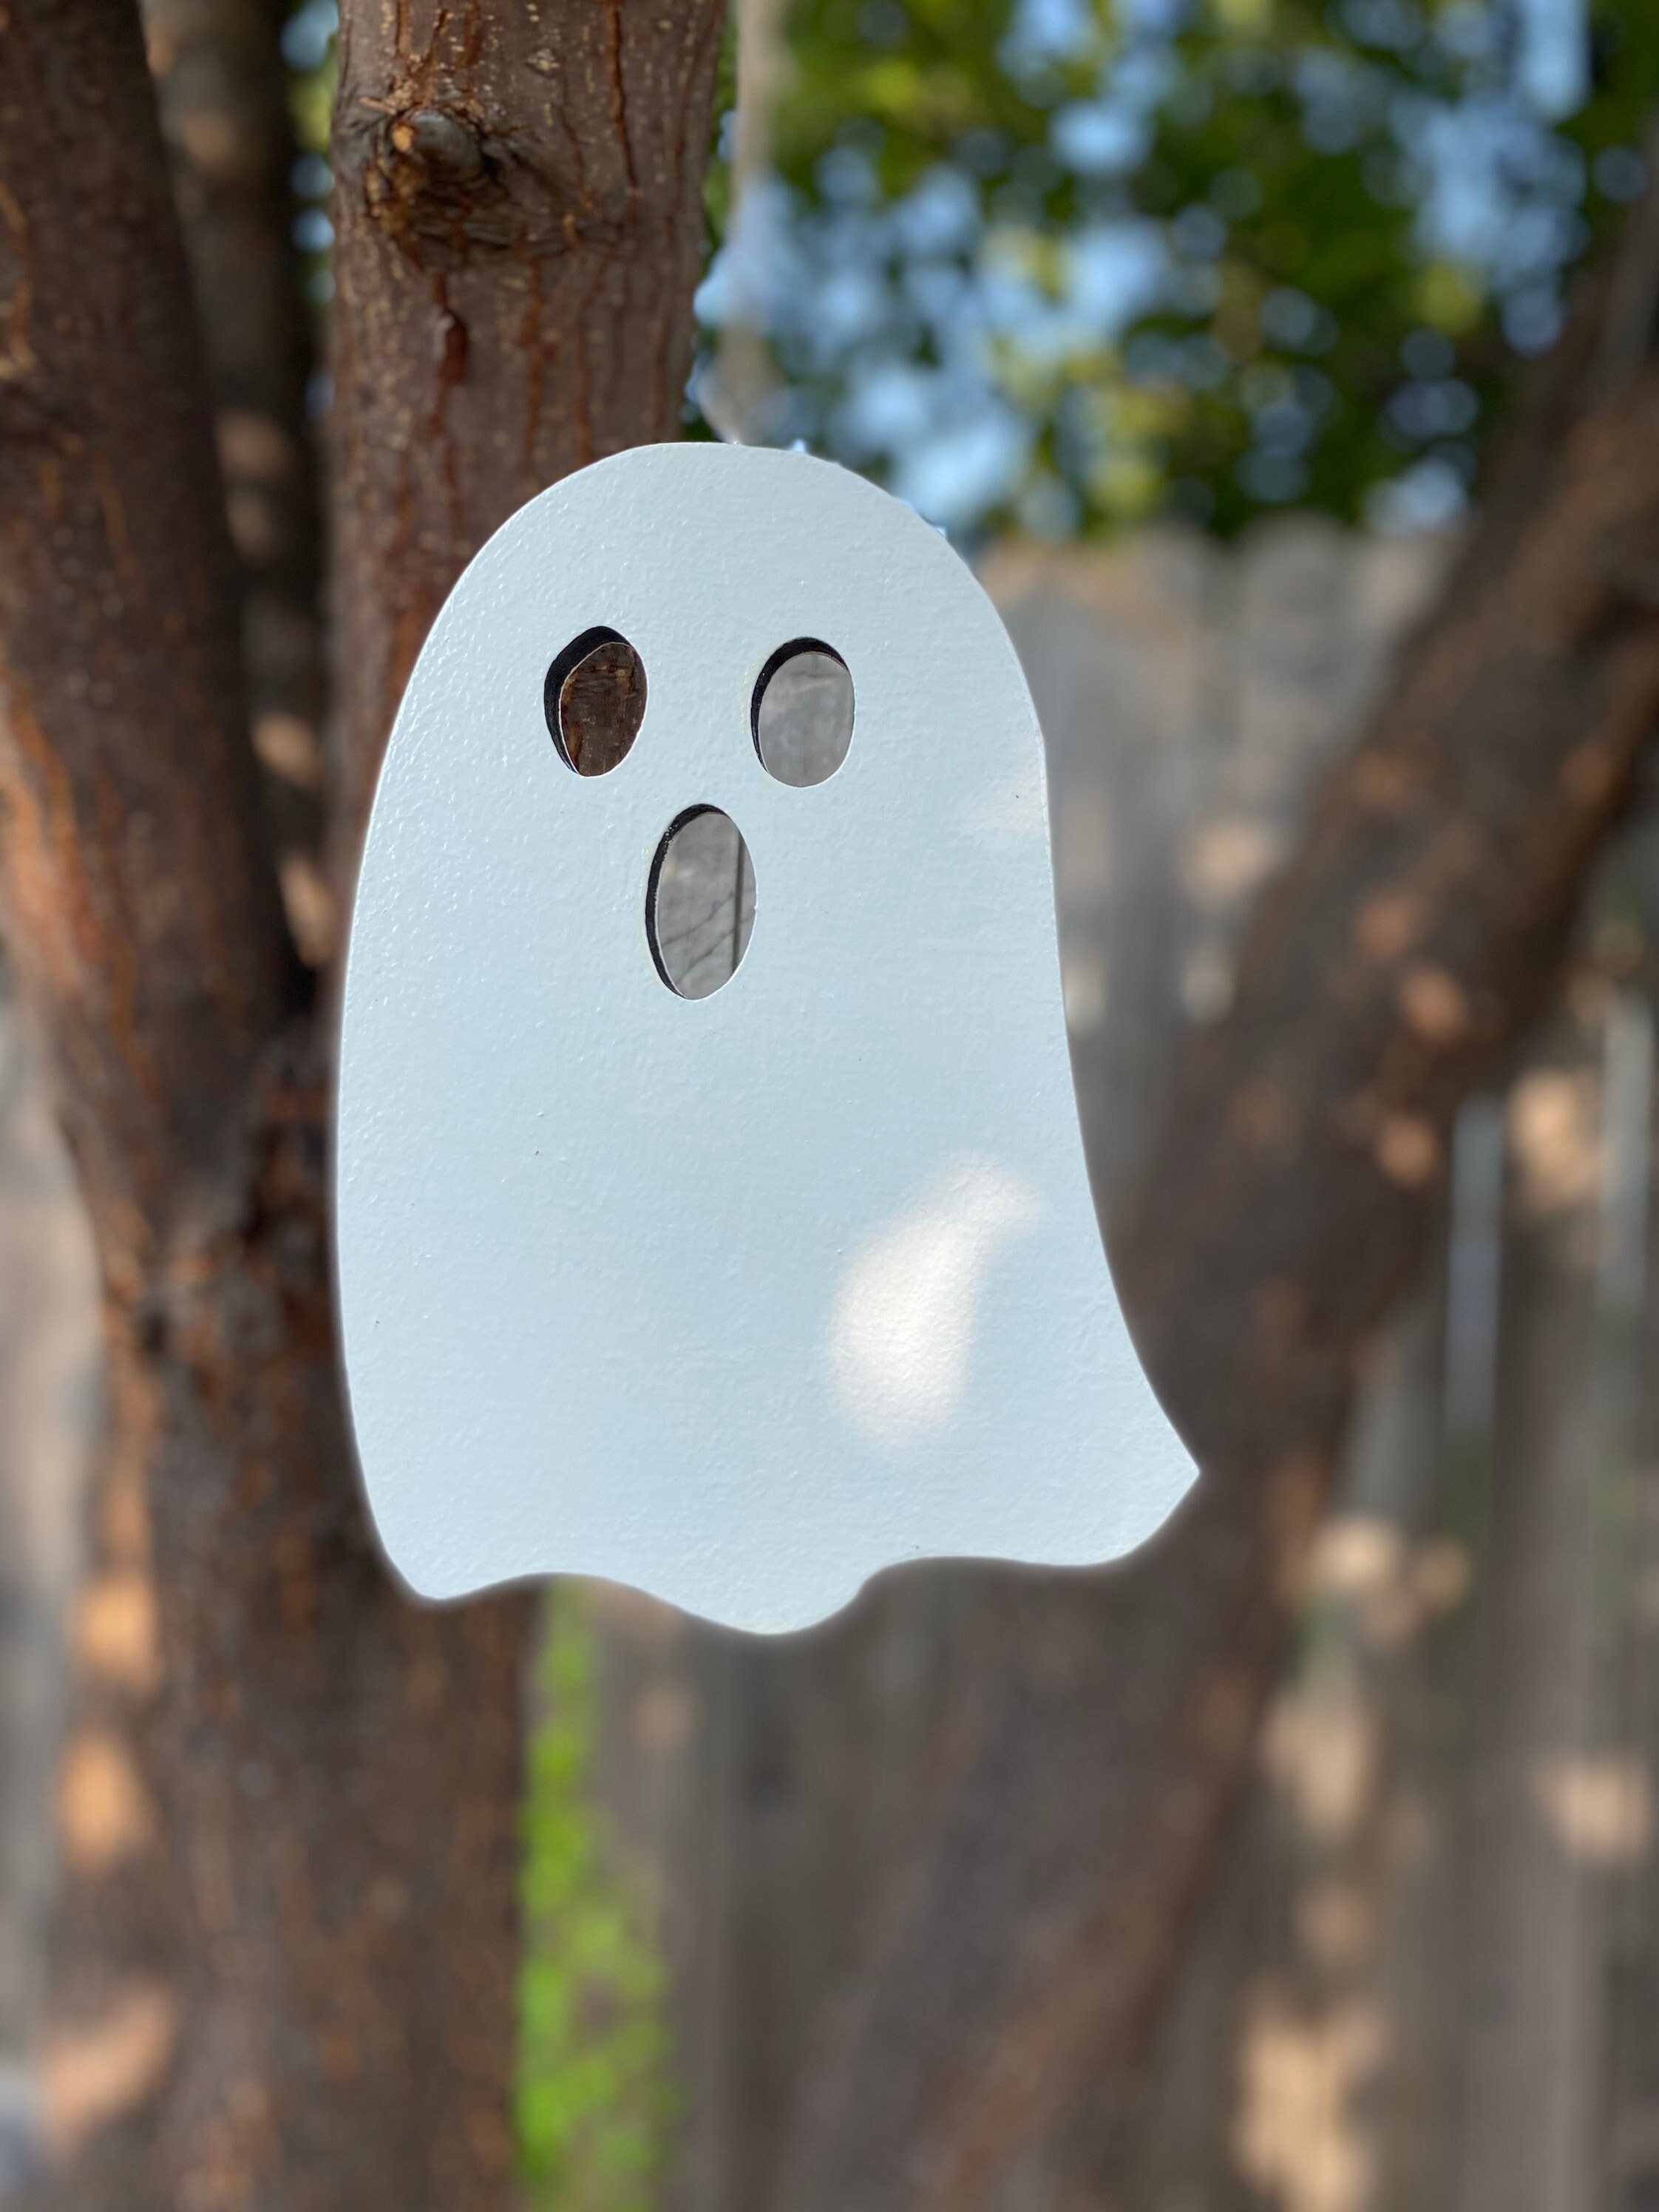 Wire Ghost Tutorial for Spooky Halloween Decorations 